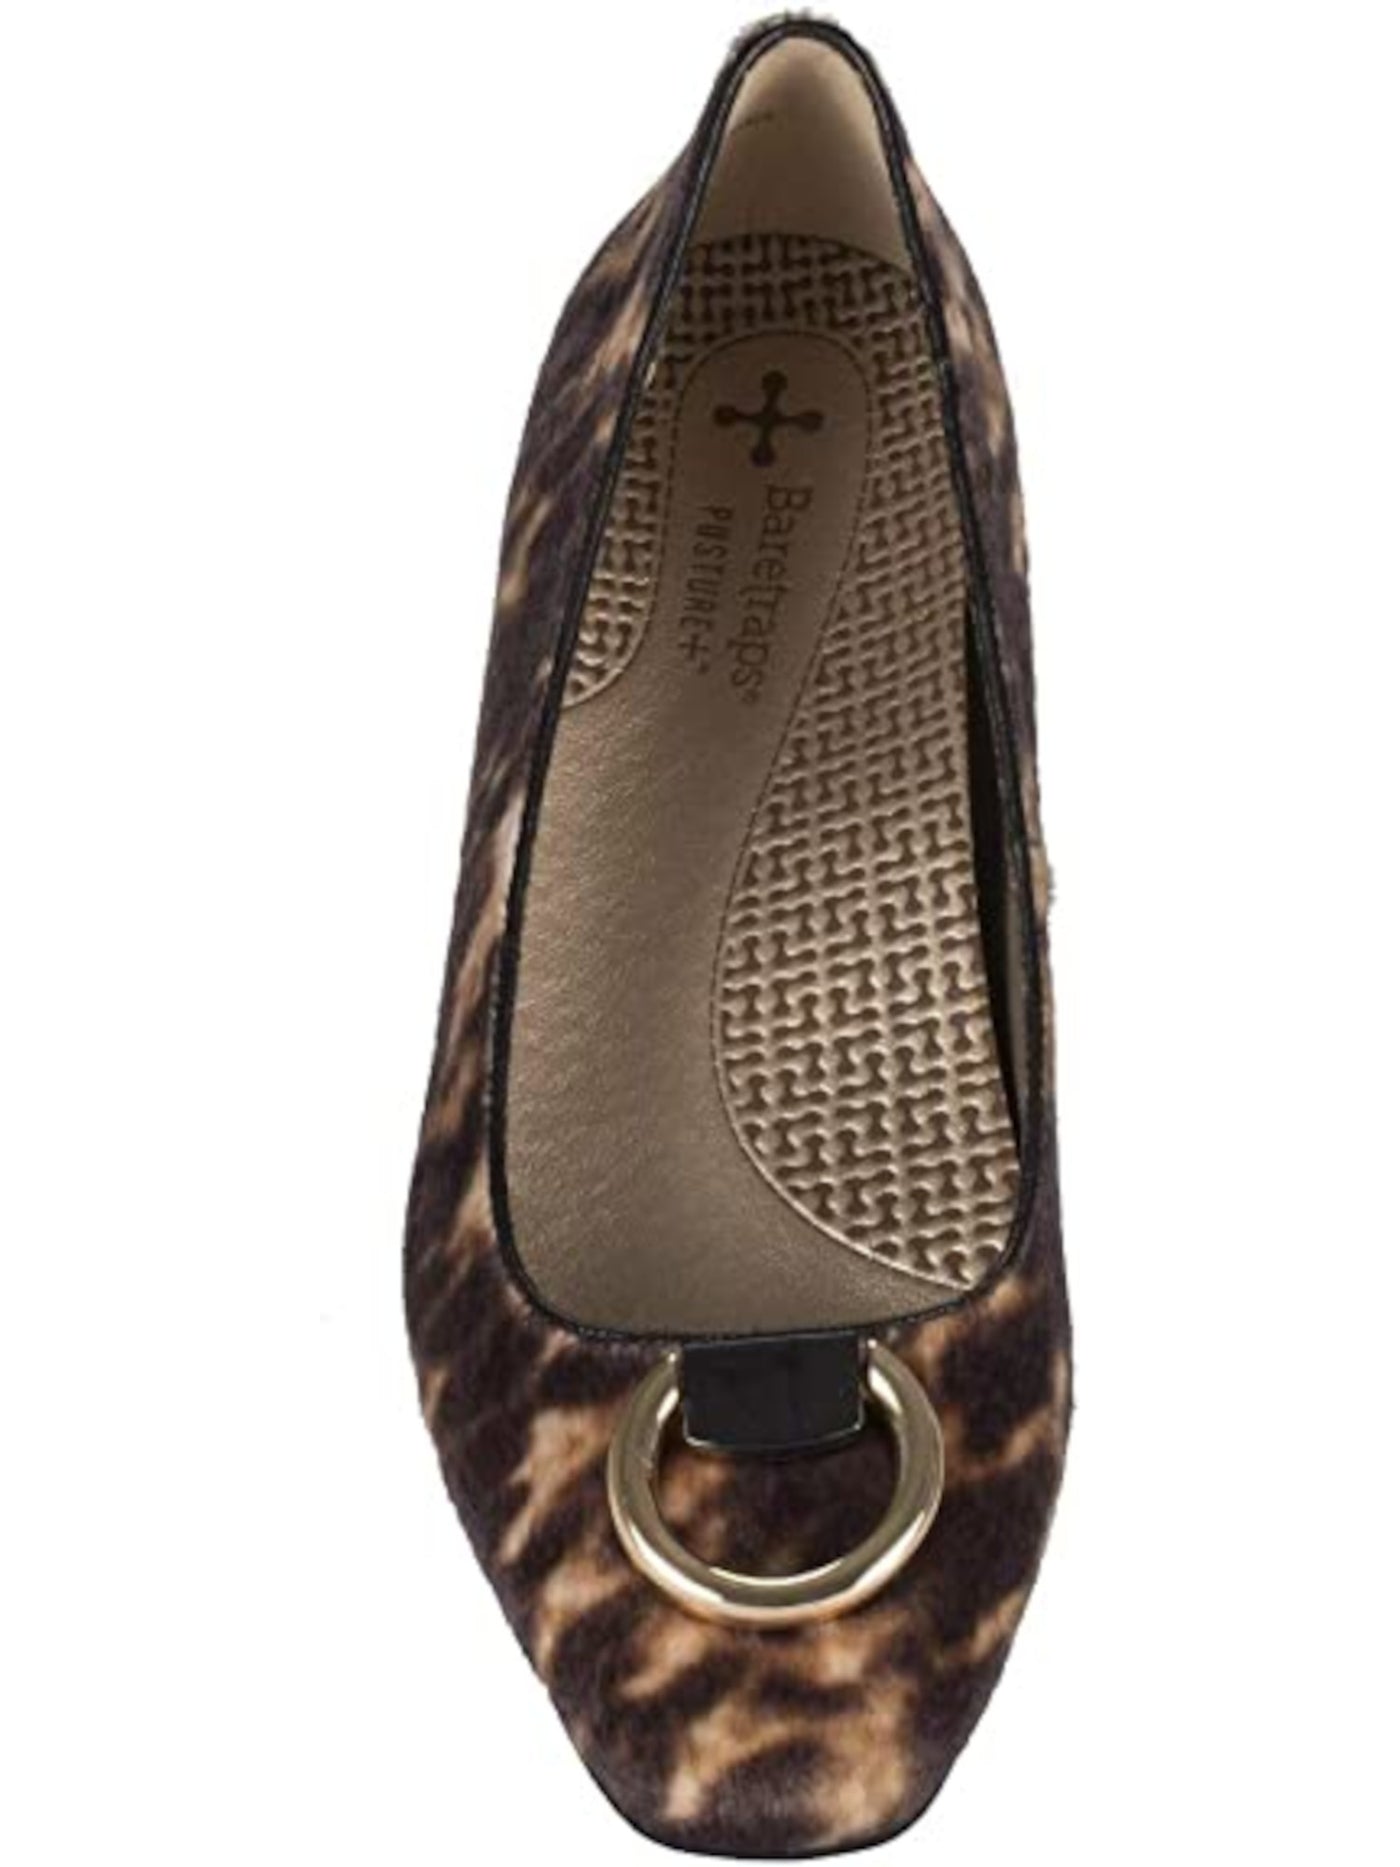 BARETRAPS POSTURE Womens Brown Exotic Animal Shiny Metal Ring Ornament Perrie Square Toe Slip On Flats Shoes 6.5 M